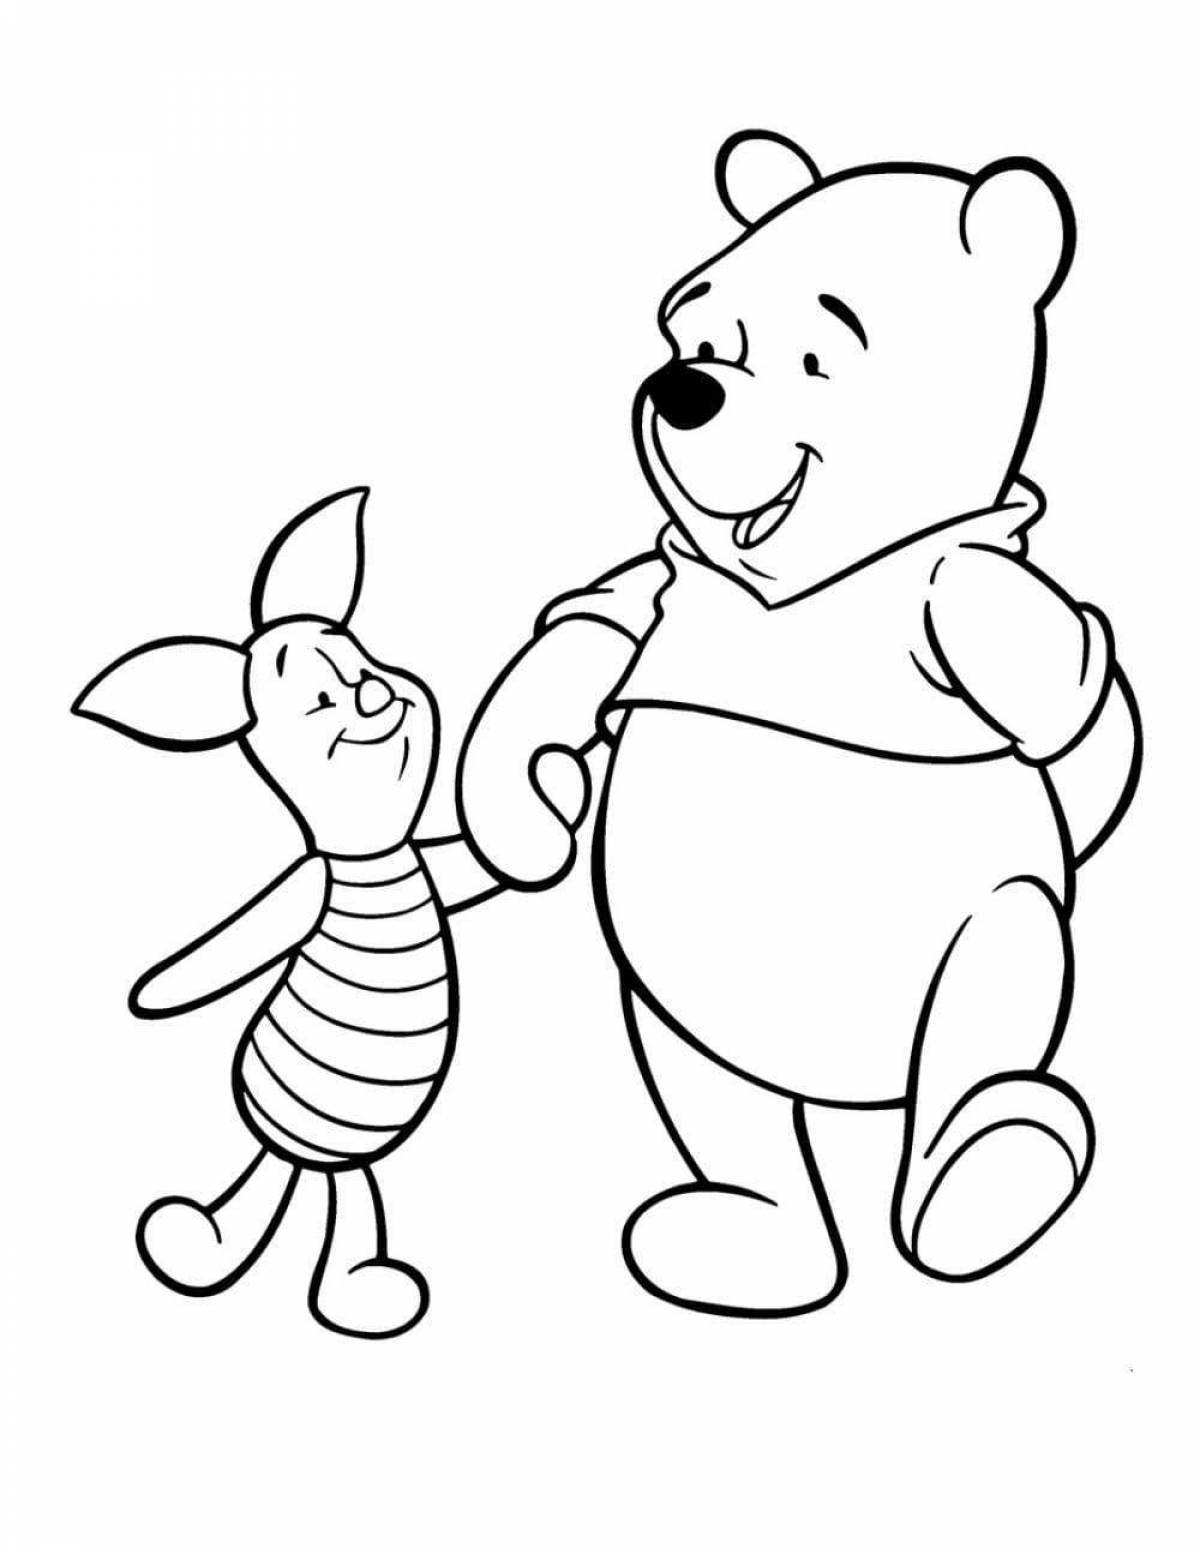 Coloring book playful Winnie the Pooh and Piglet